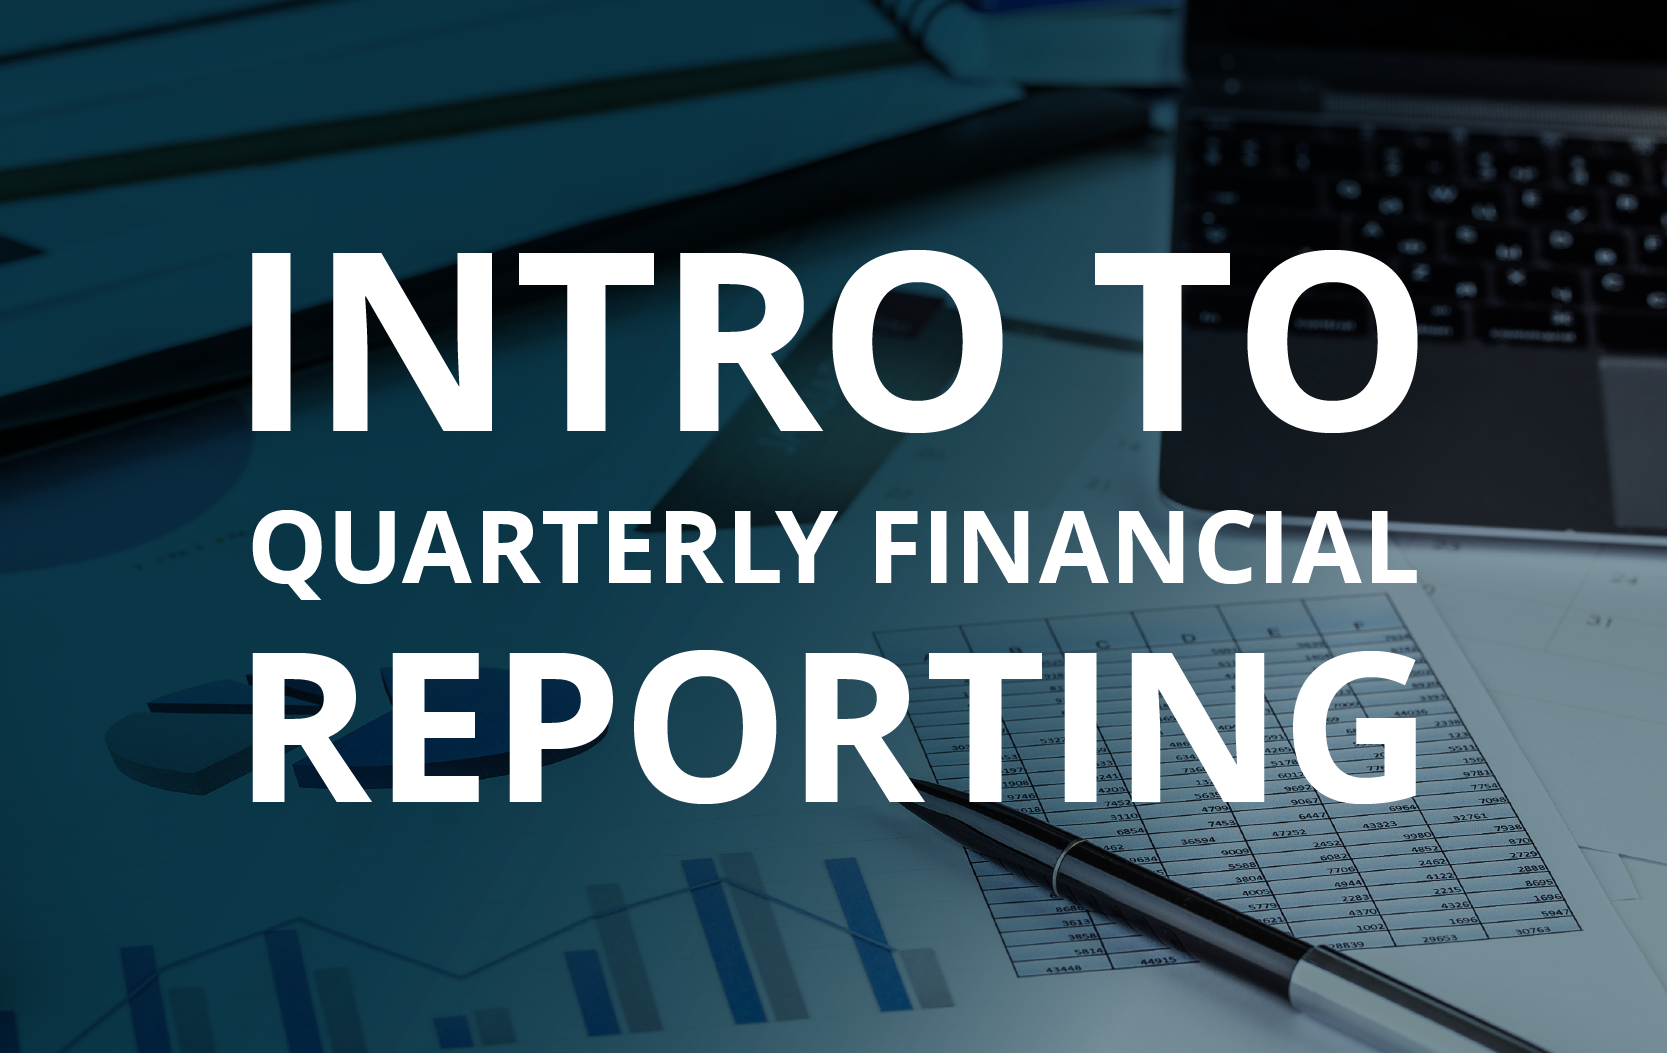 image for Intro to Quarterly Financial Reporting